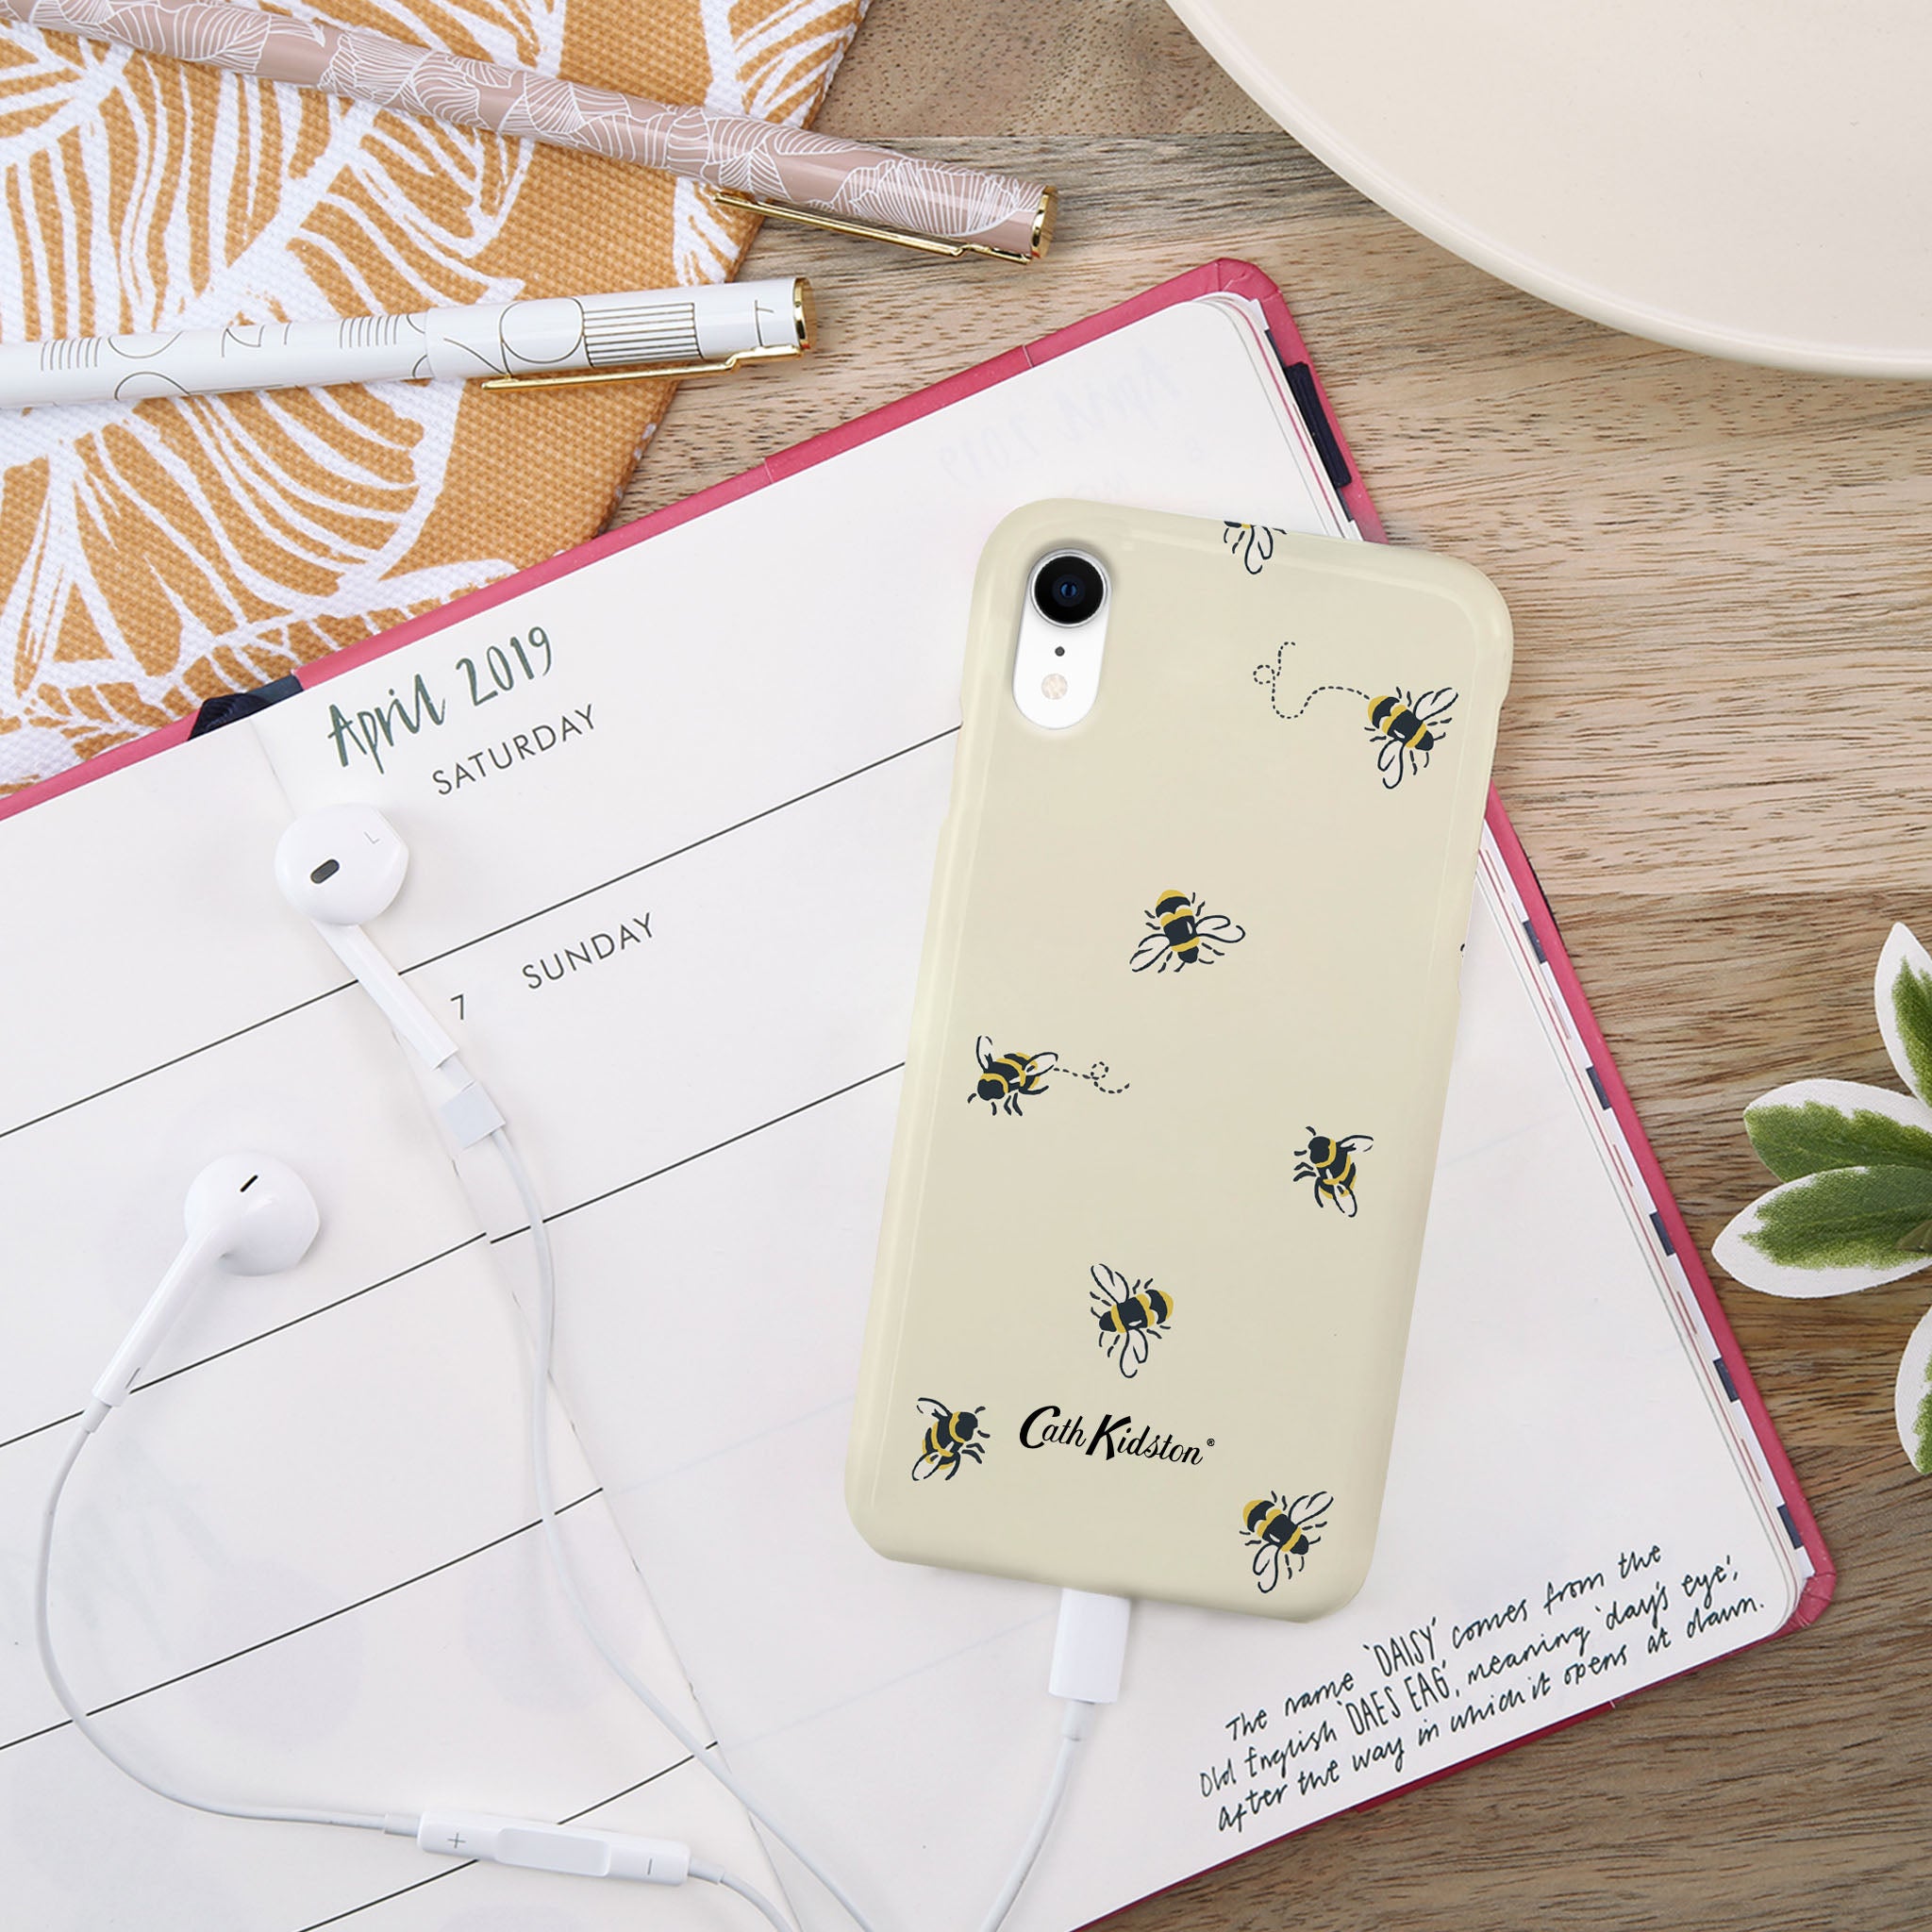 The MYVQ iPhone XR series premium high gloss scratch-resistant phone case. Featuring a luxurious microfiber insert to cradle and protect your smartphone device.  